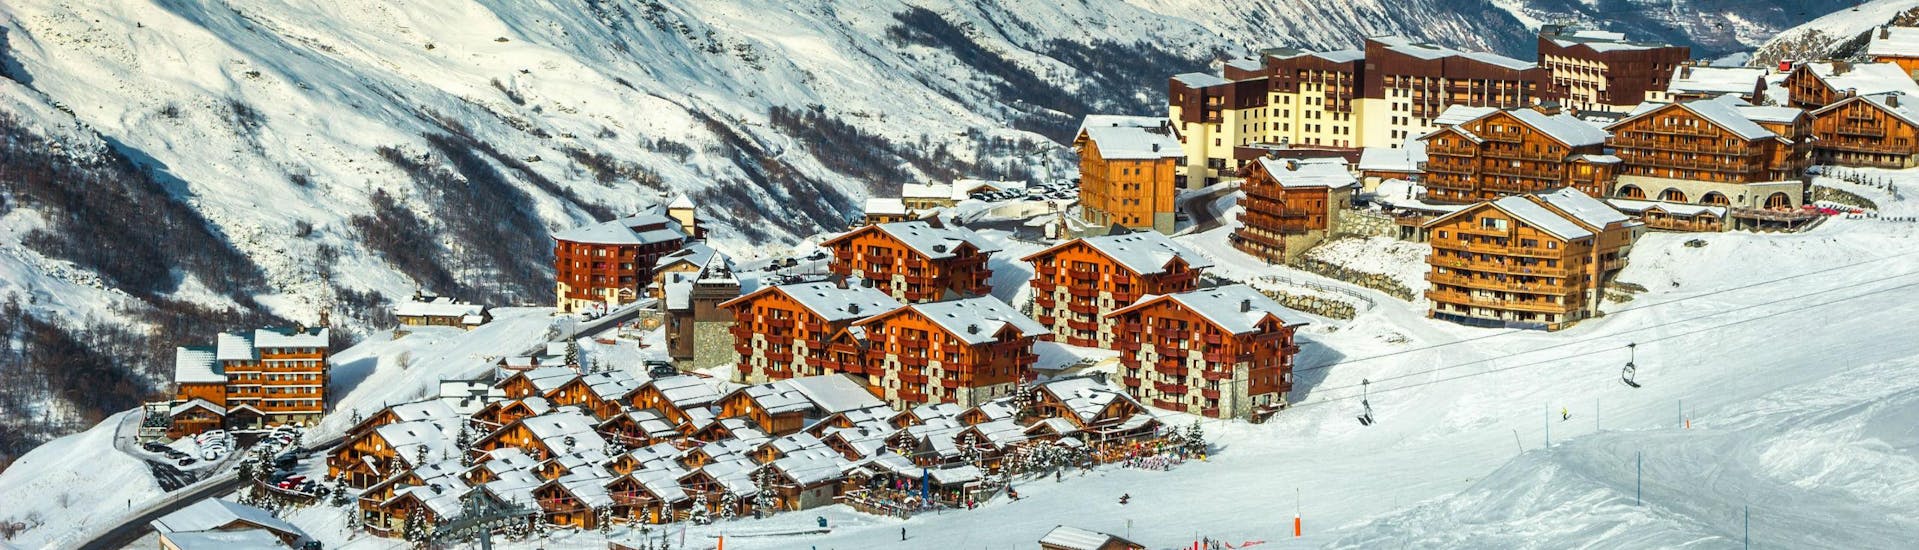 A view of the French ski resort of Les Menuires in the Les Trois Vallées ski region, where local ski schools offer ski lessons for snow sports enthusiasts who want to learn to ski.